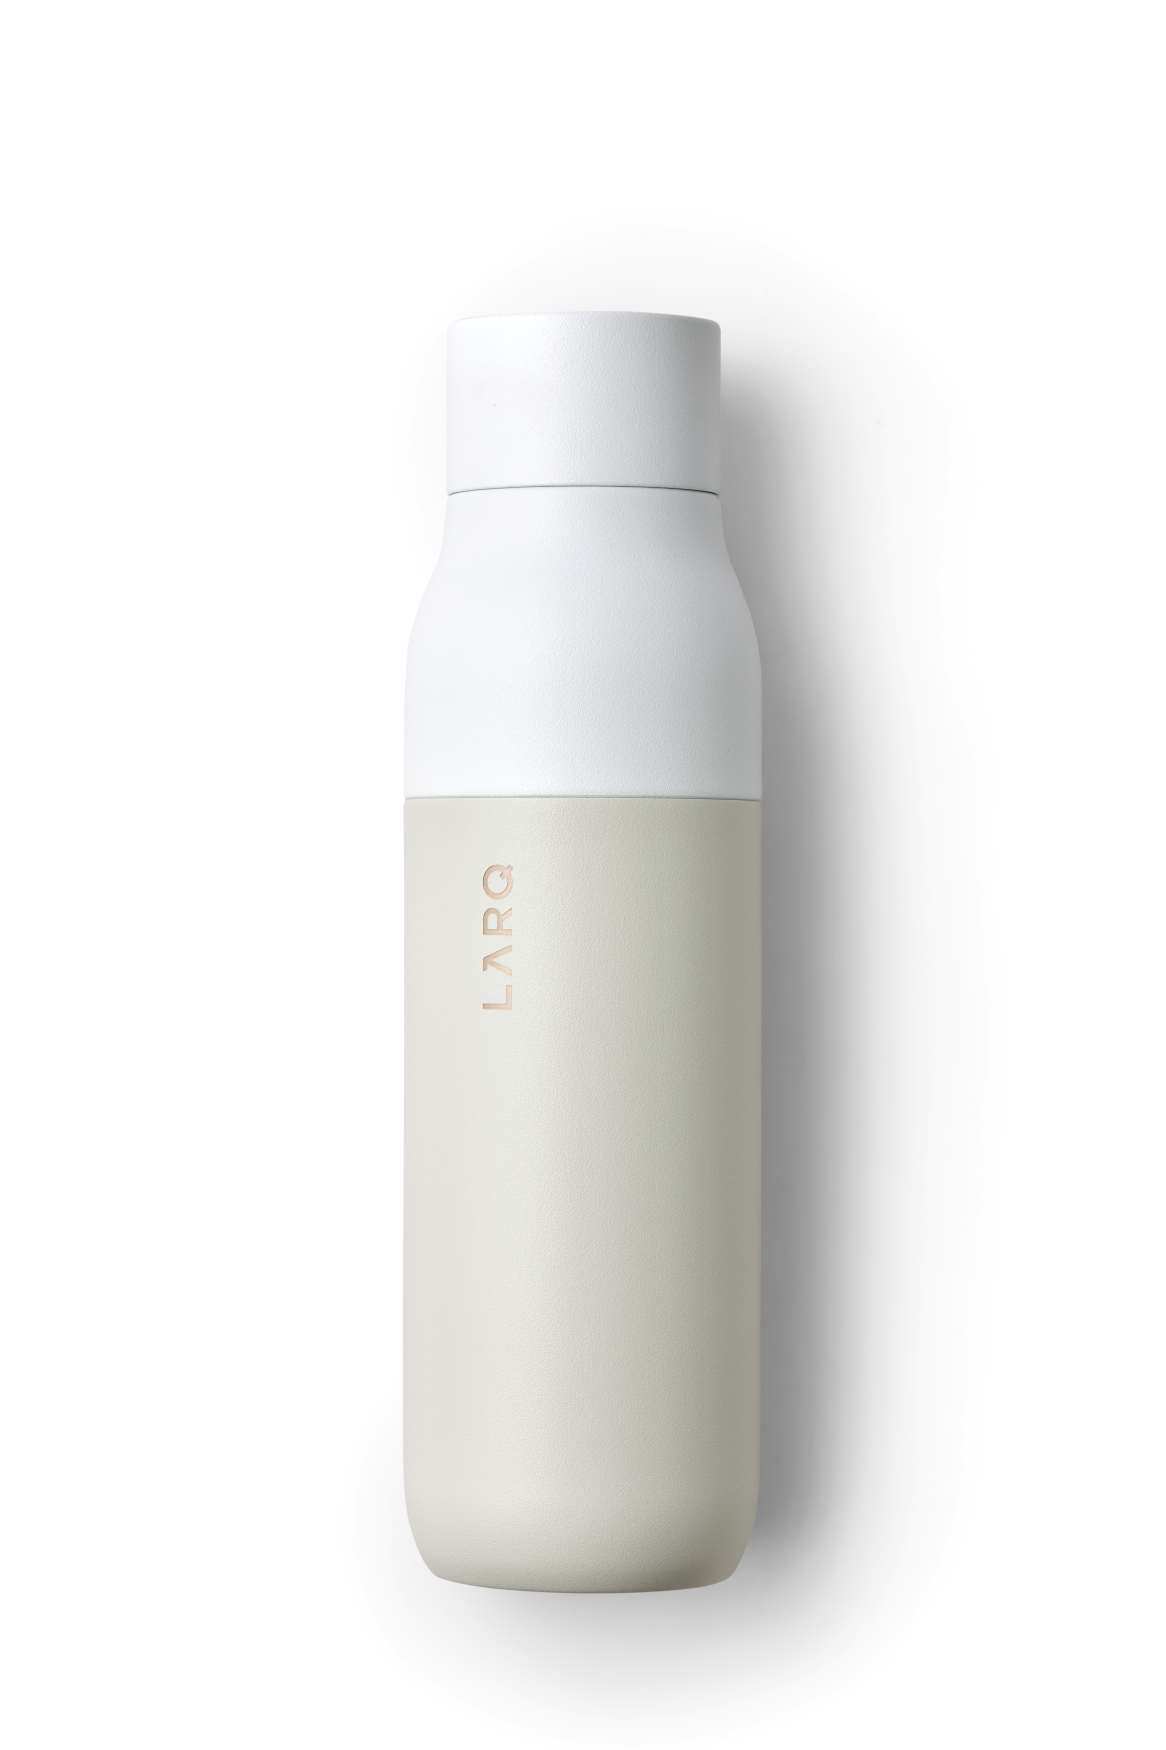 Picture of Larq 500Ml White Bottle Double Wall